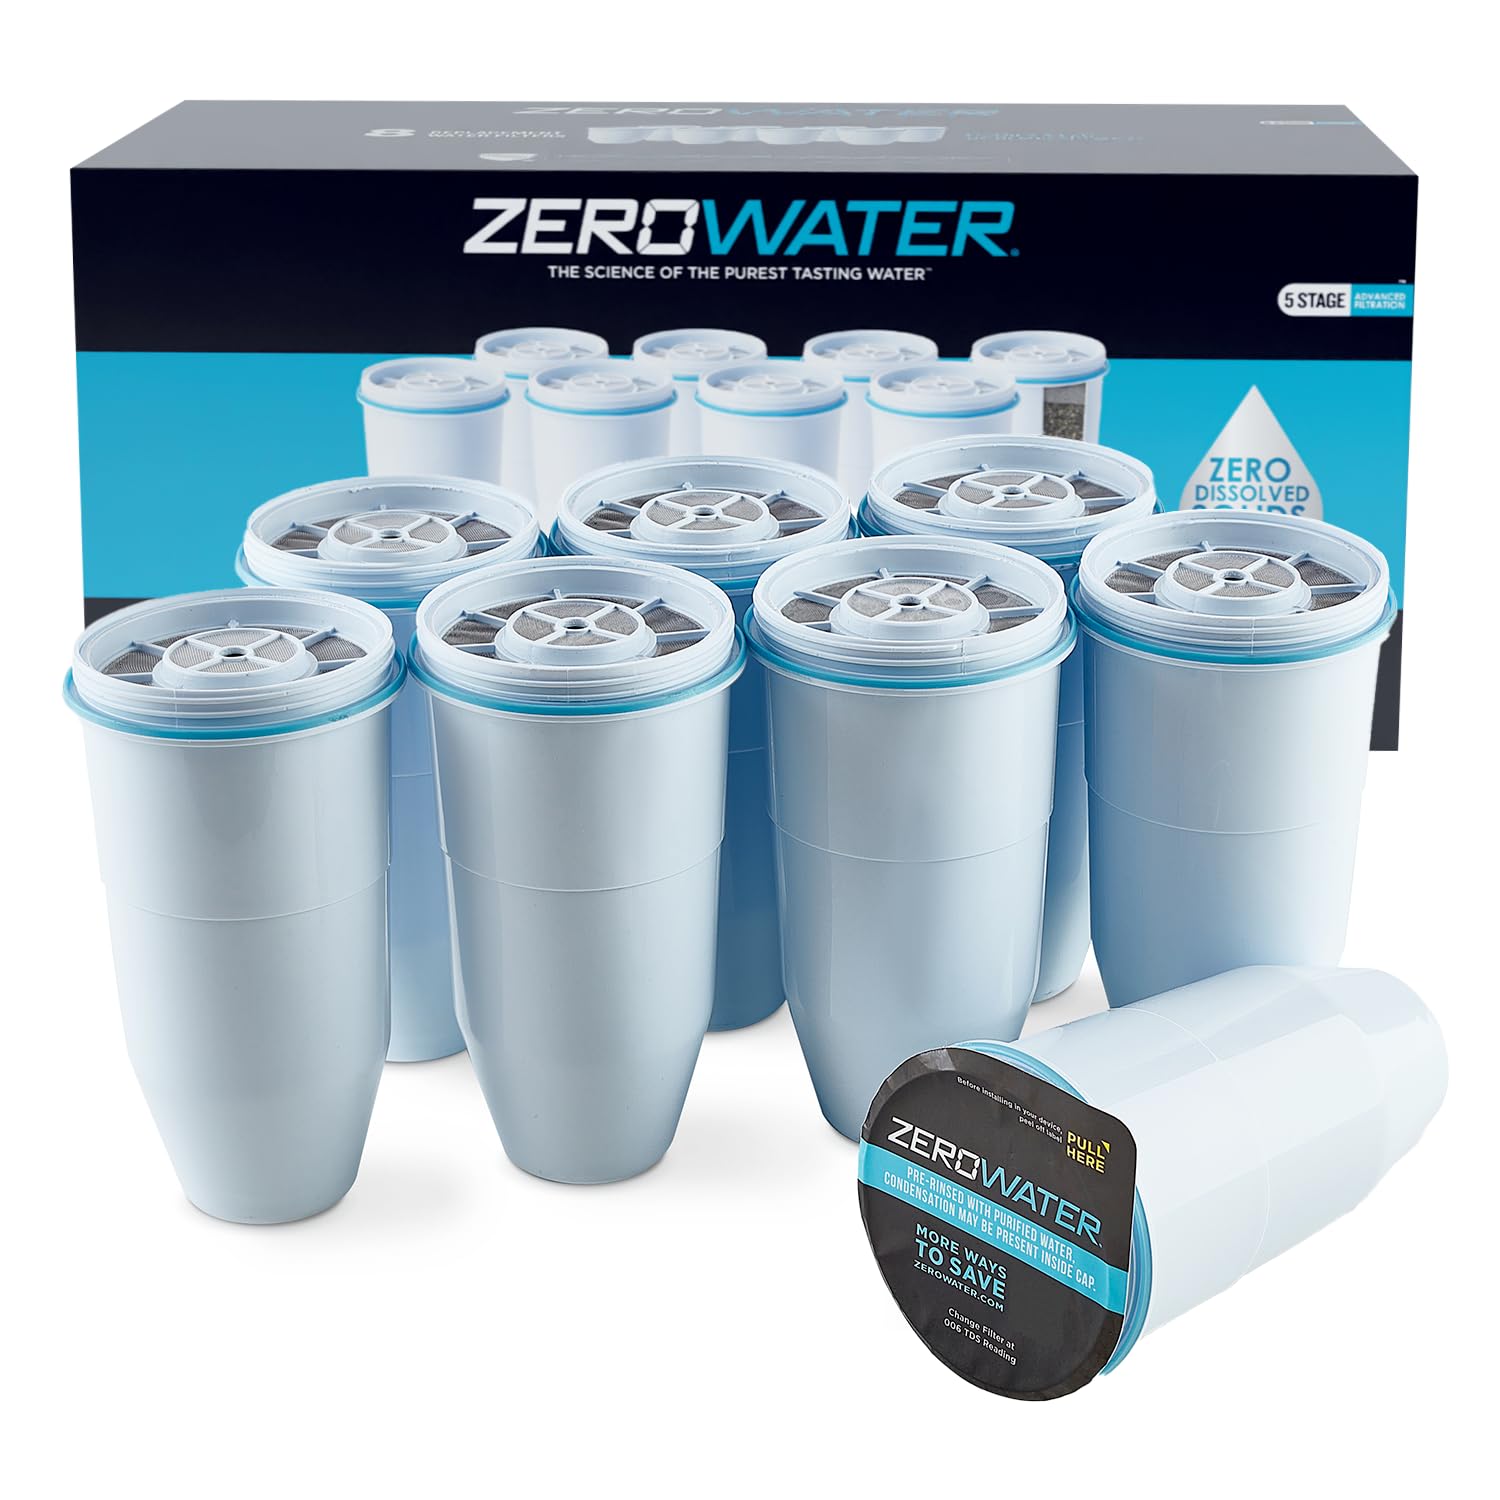 ZeroWater Official Replacement Filter - 5-Stage Filter Replacement 0 TDS for Improved Tap Water Taste - System IAPMO Certified to Reduce Lead, Chromium, and PFOA/PFOS, 8-Pack